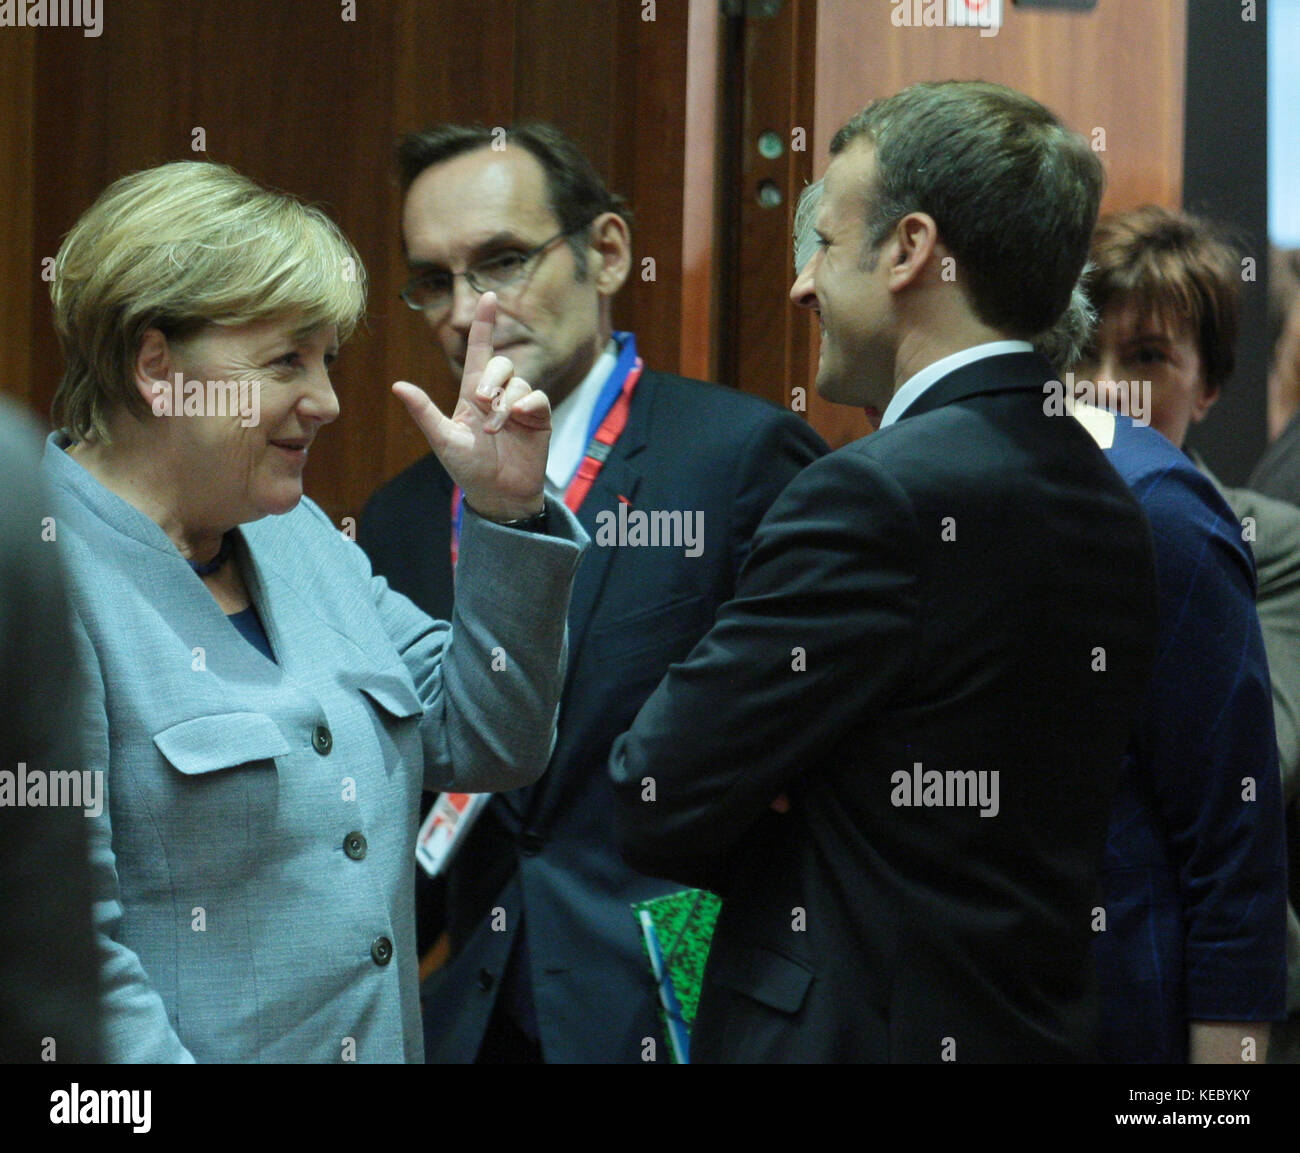 Brussels, Belgium. 19th Oct, 2017. Angela MERKEL, Federal Chancellor of Germany and Emmanuel Macron President of France at the European Council, during the round table. Credit: Leo Cavallo/Alamy Live News Stock Photo